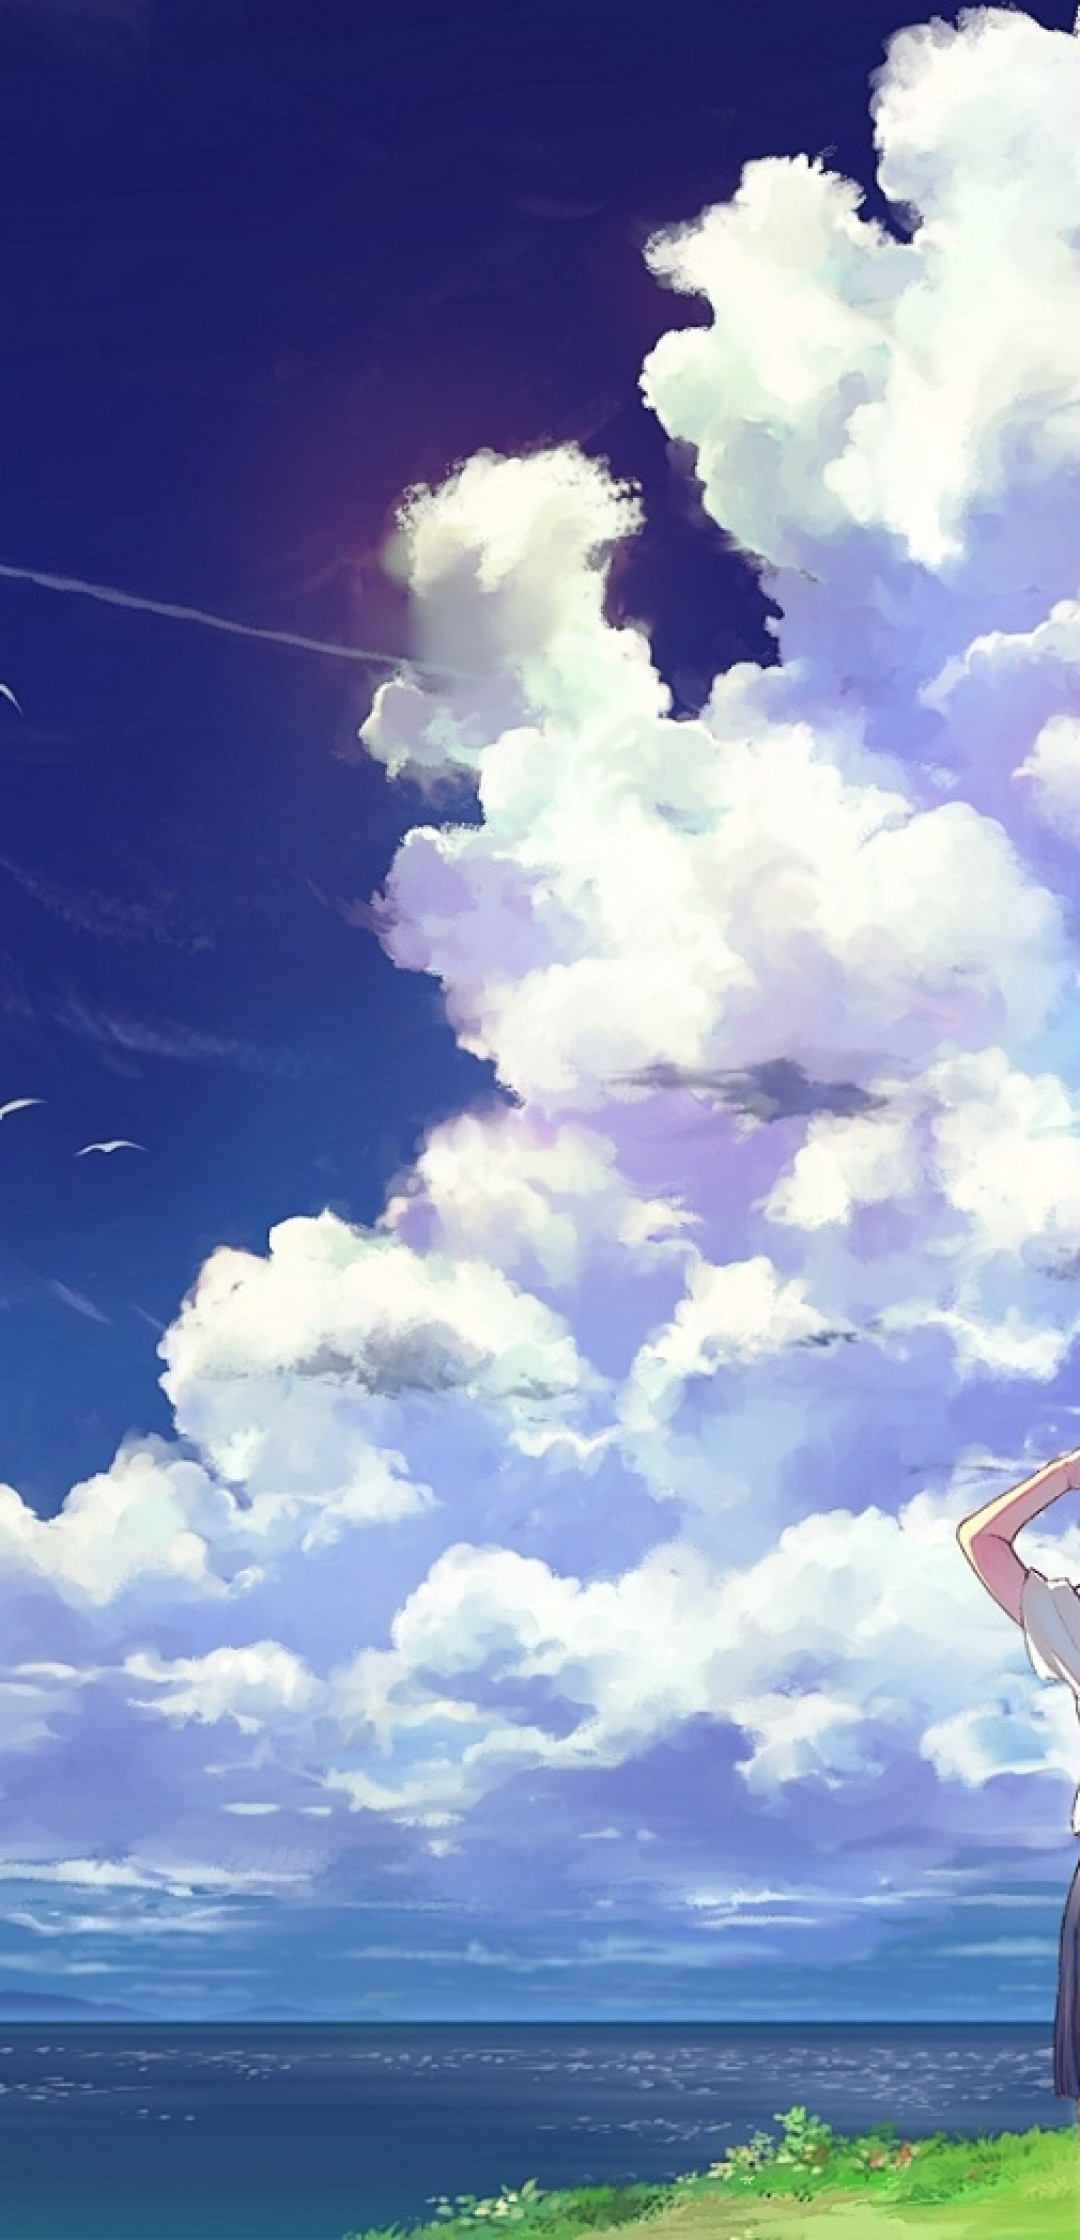 Download 1080x2240 Anime School Girl, Anime Landscape, Clouds, Scenic, Summer Wallpaper for Huawei P20 Pro